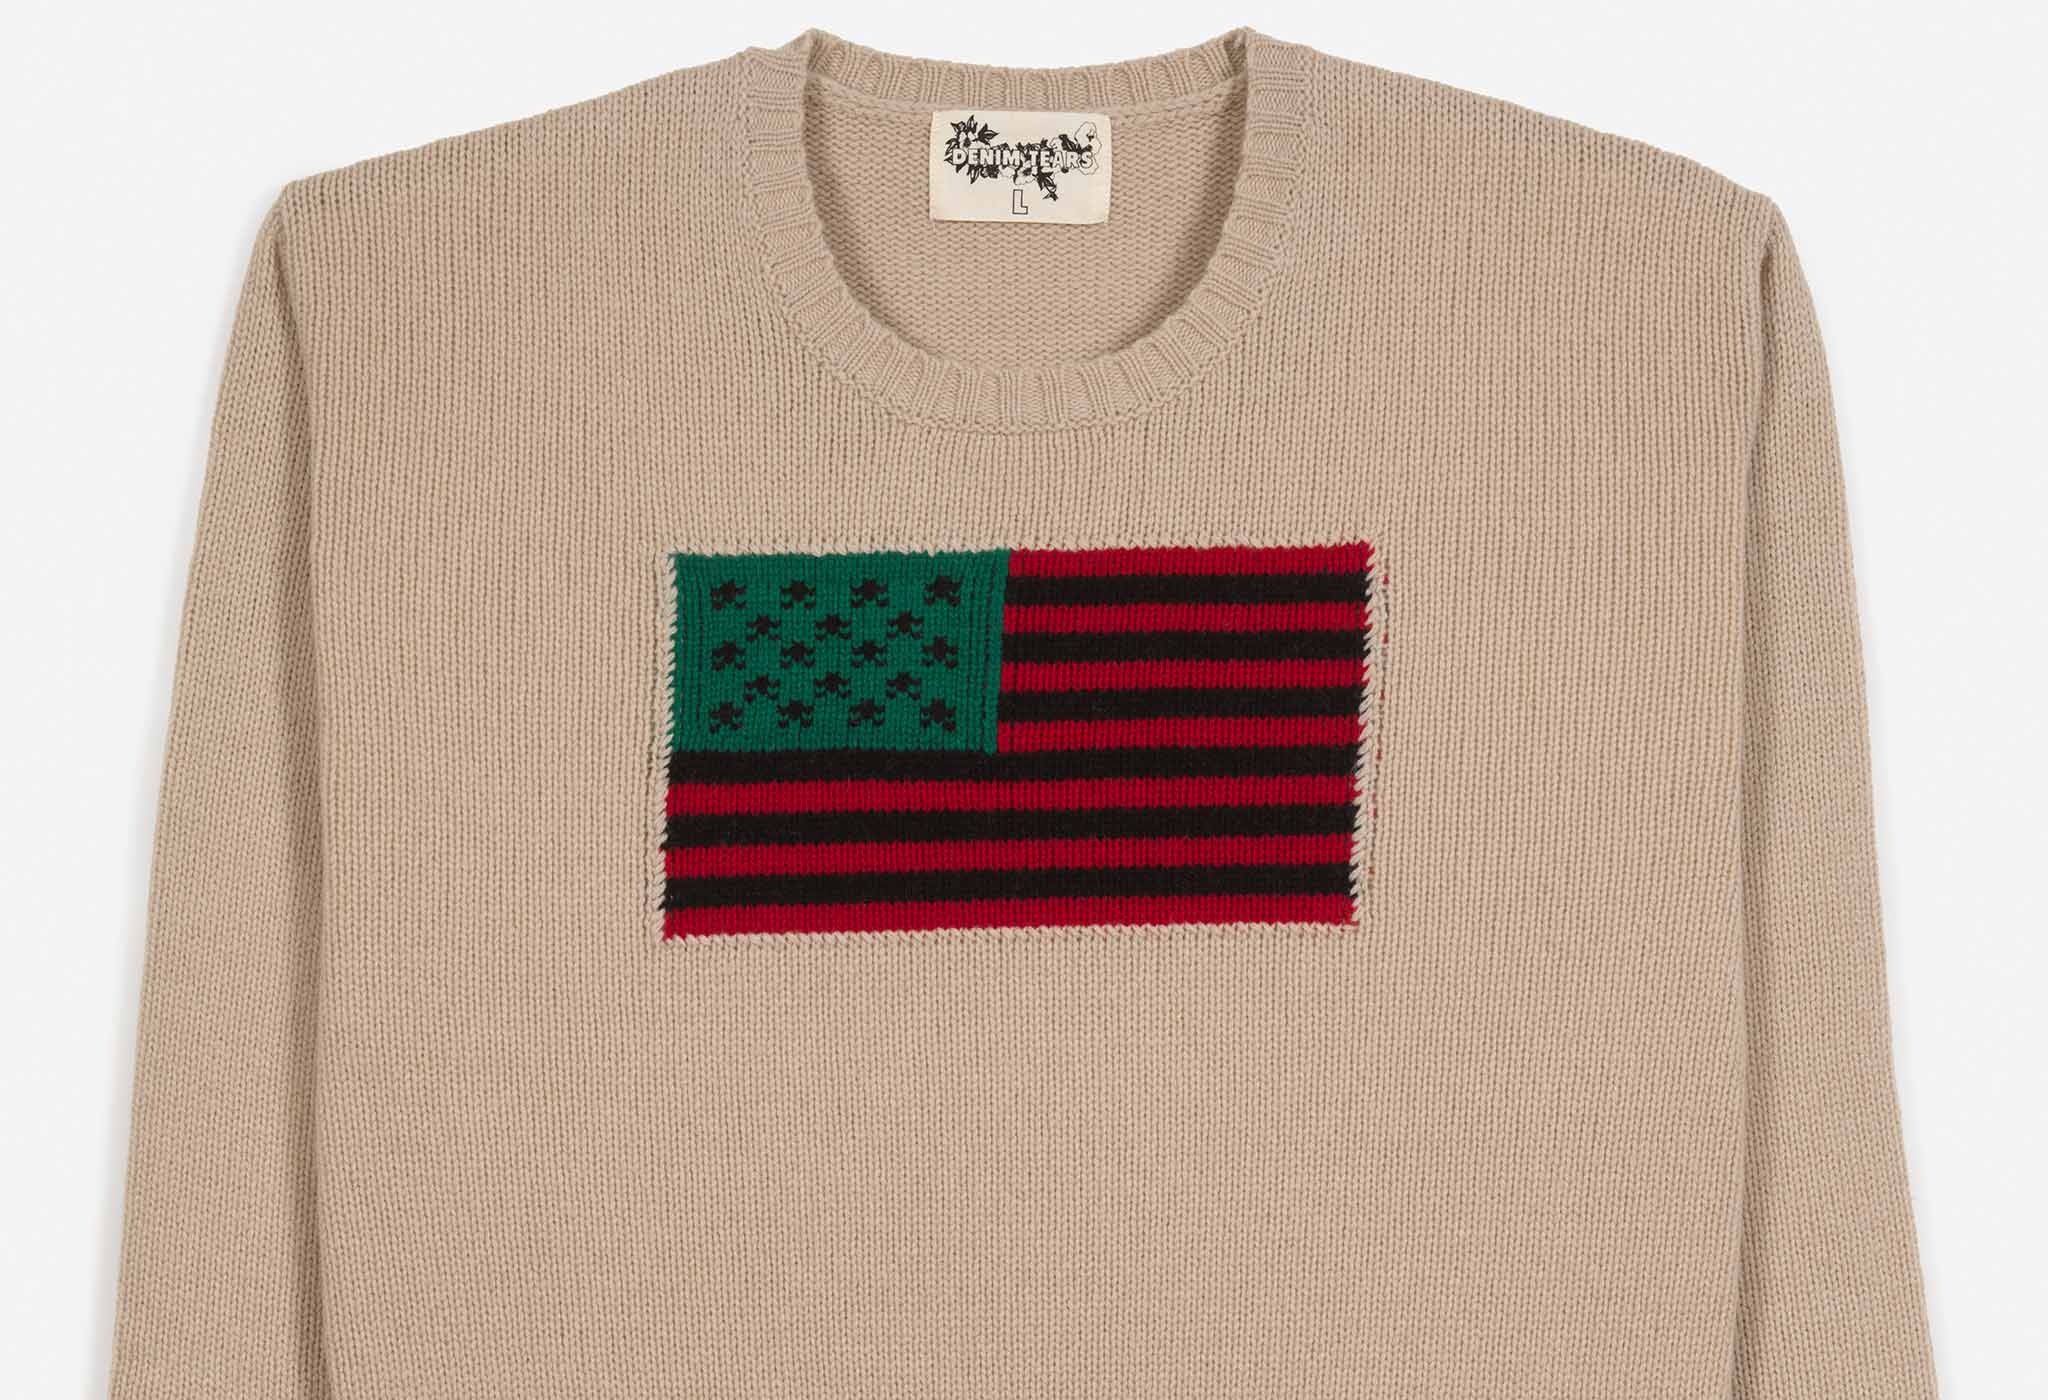 “Tyson Beckford” beige crewneck sweater with the Pan African flag